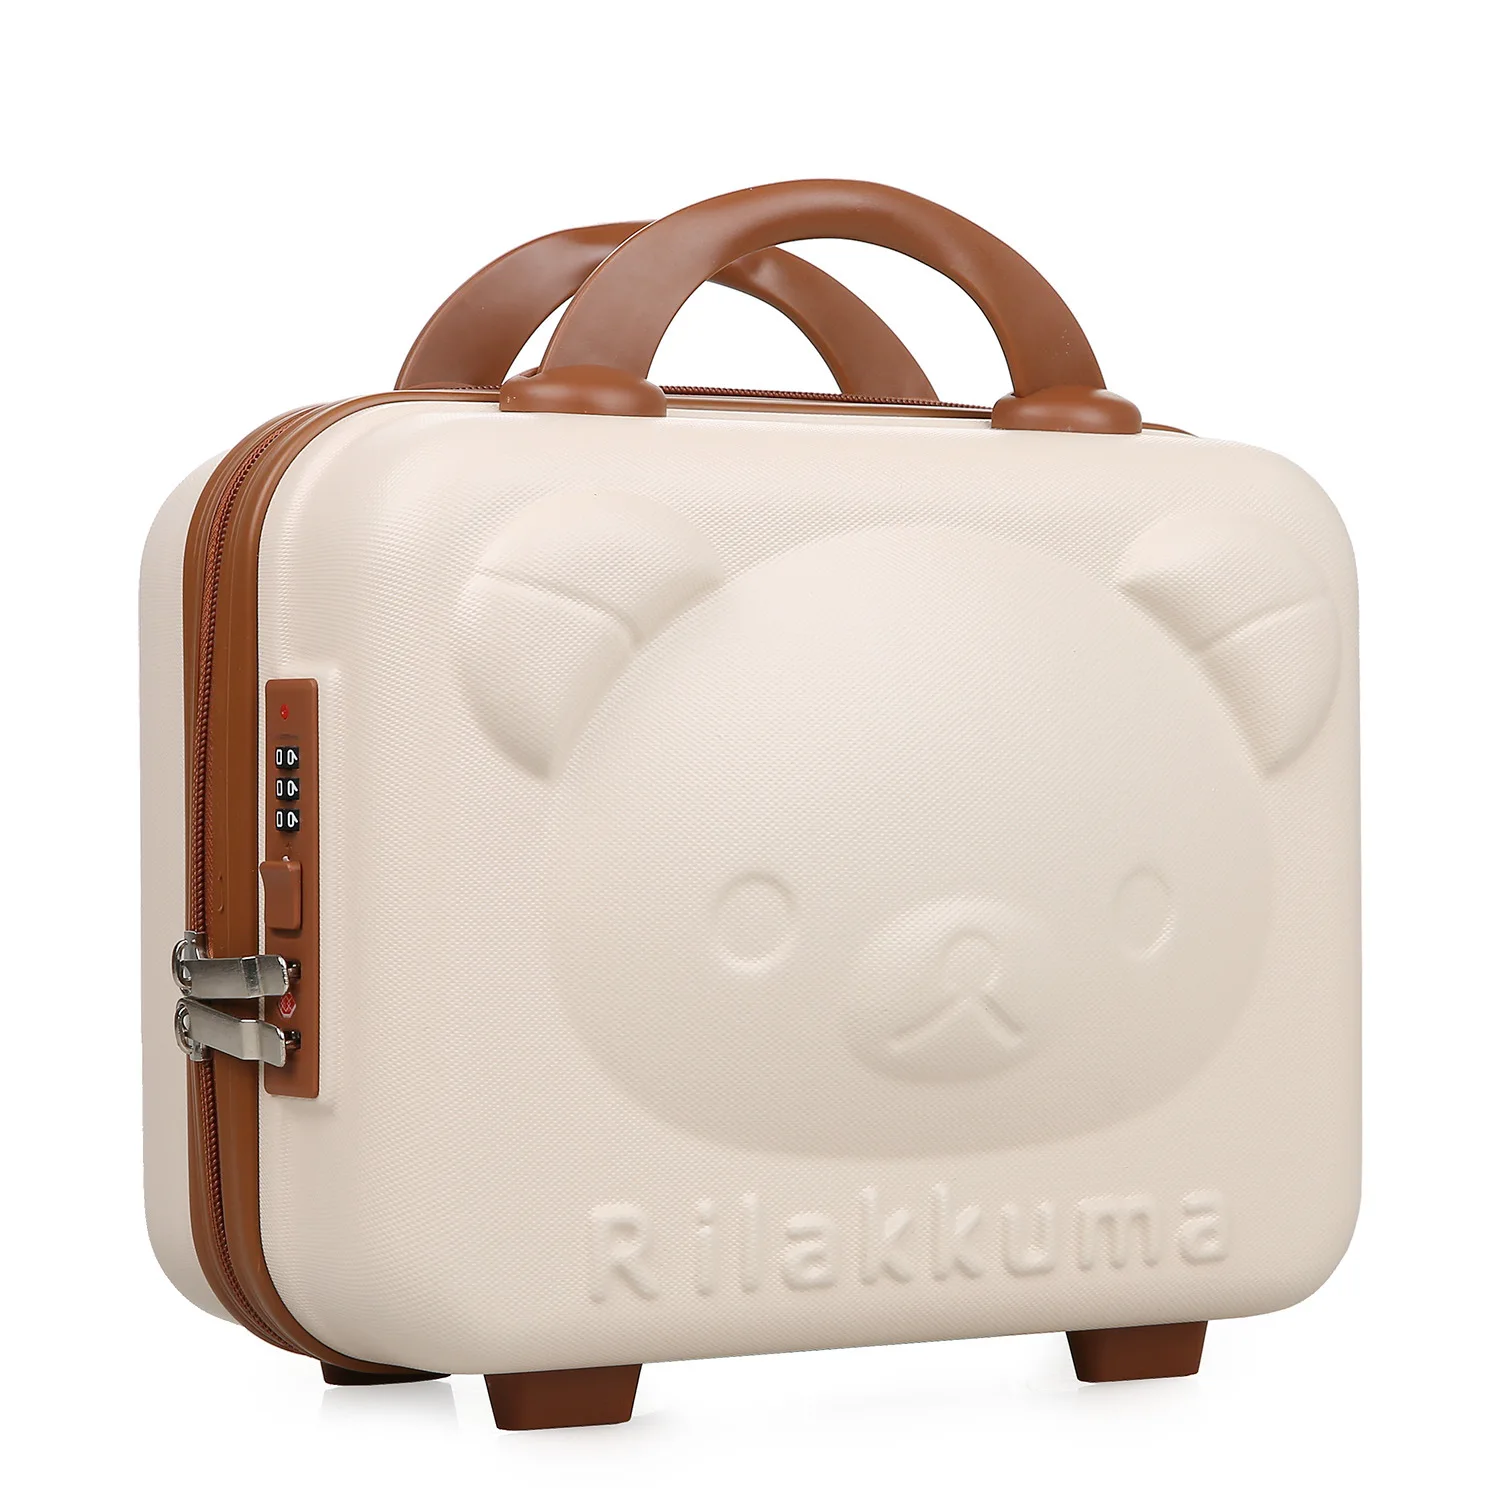 Fashion Gift With Hands Bear Portable Storage Cosmetic Case Portable14-Inch Zipper Code Lock ABS Suitcase